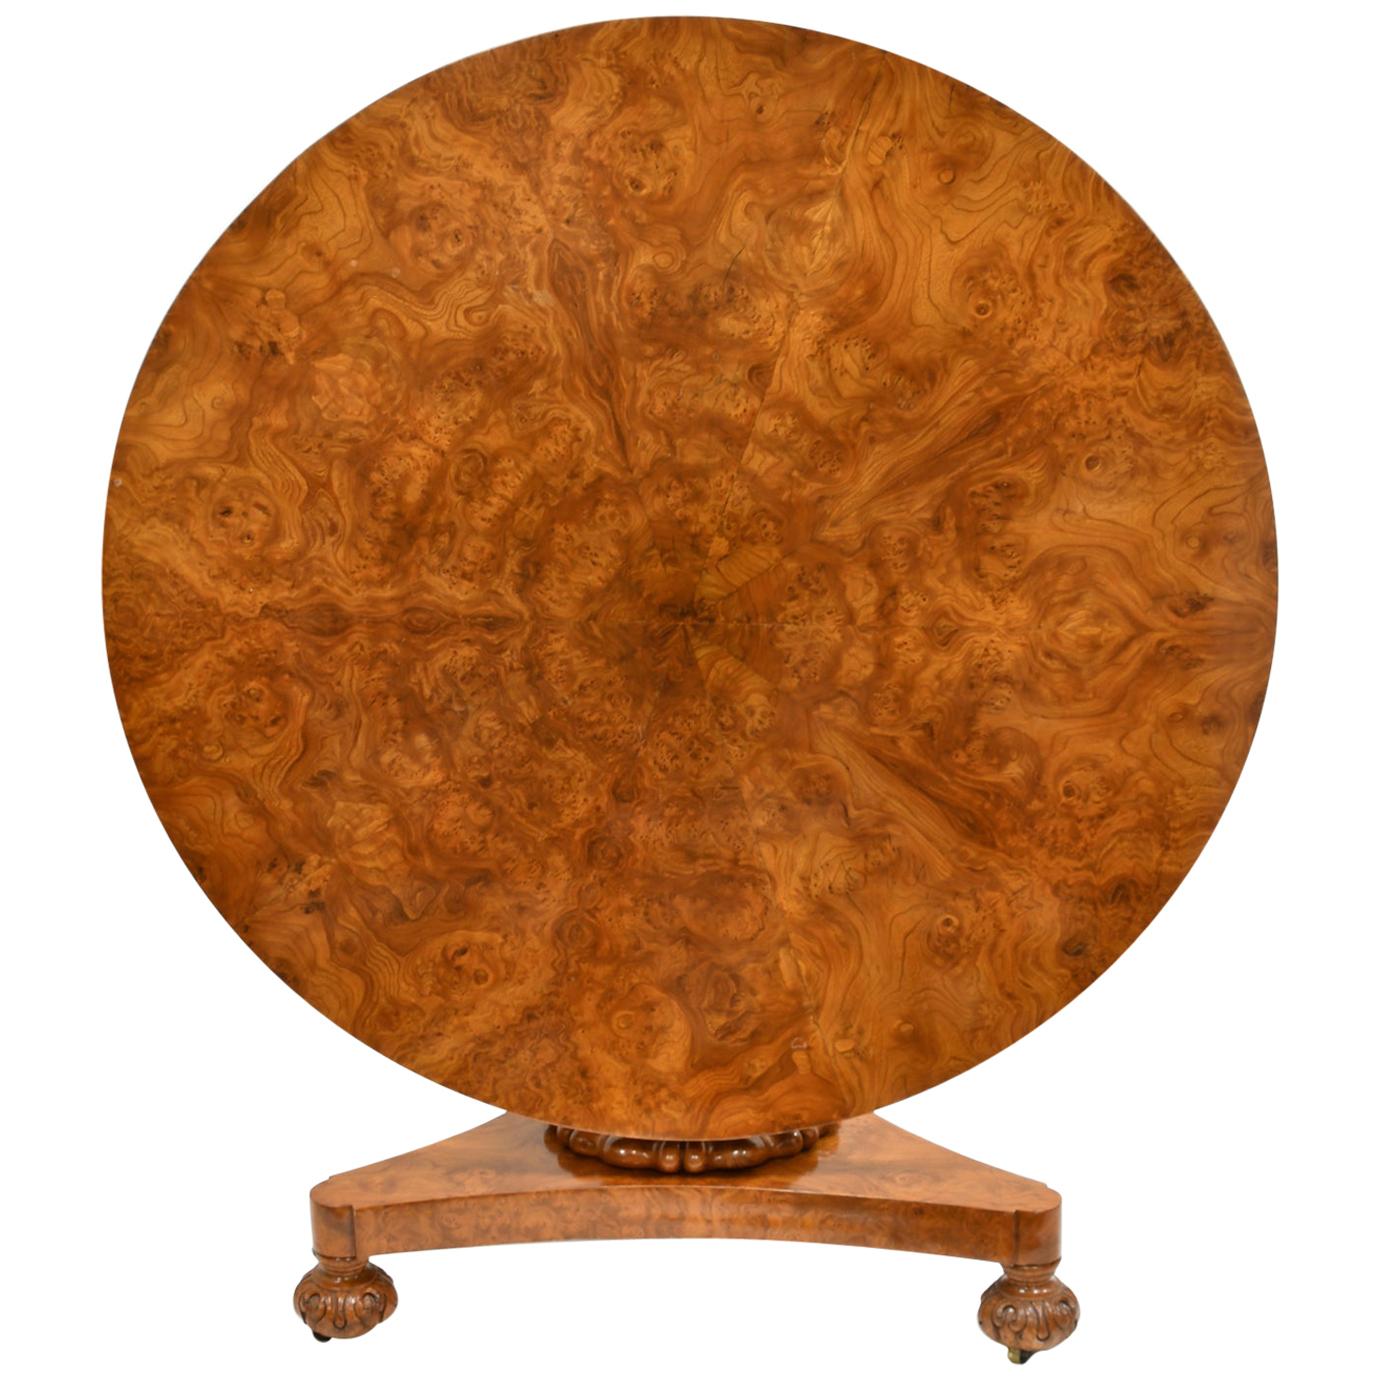 Antique English William IV Round Center or Loo Table in Burl Ash on Pedestal